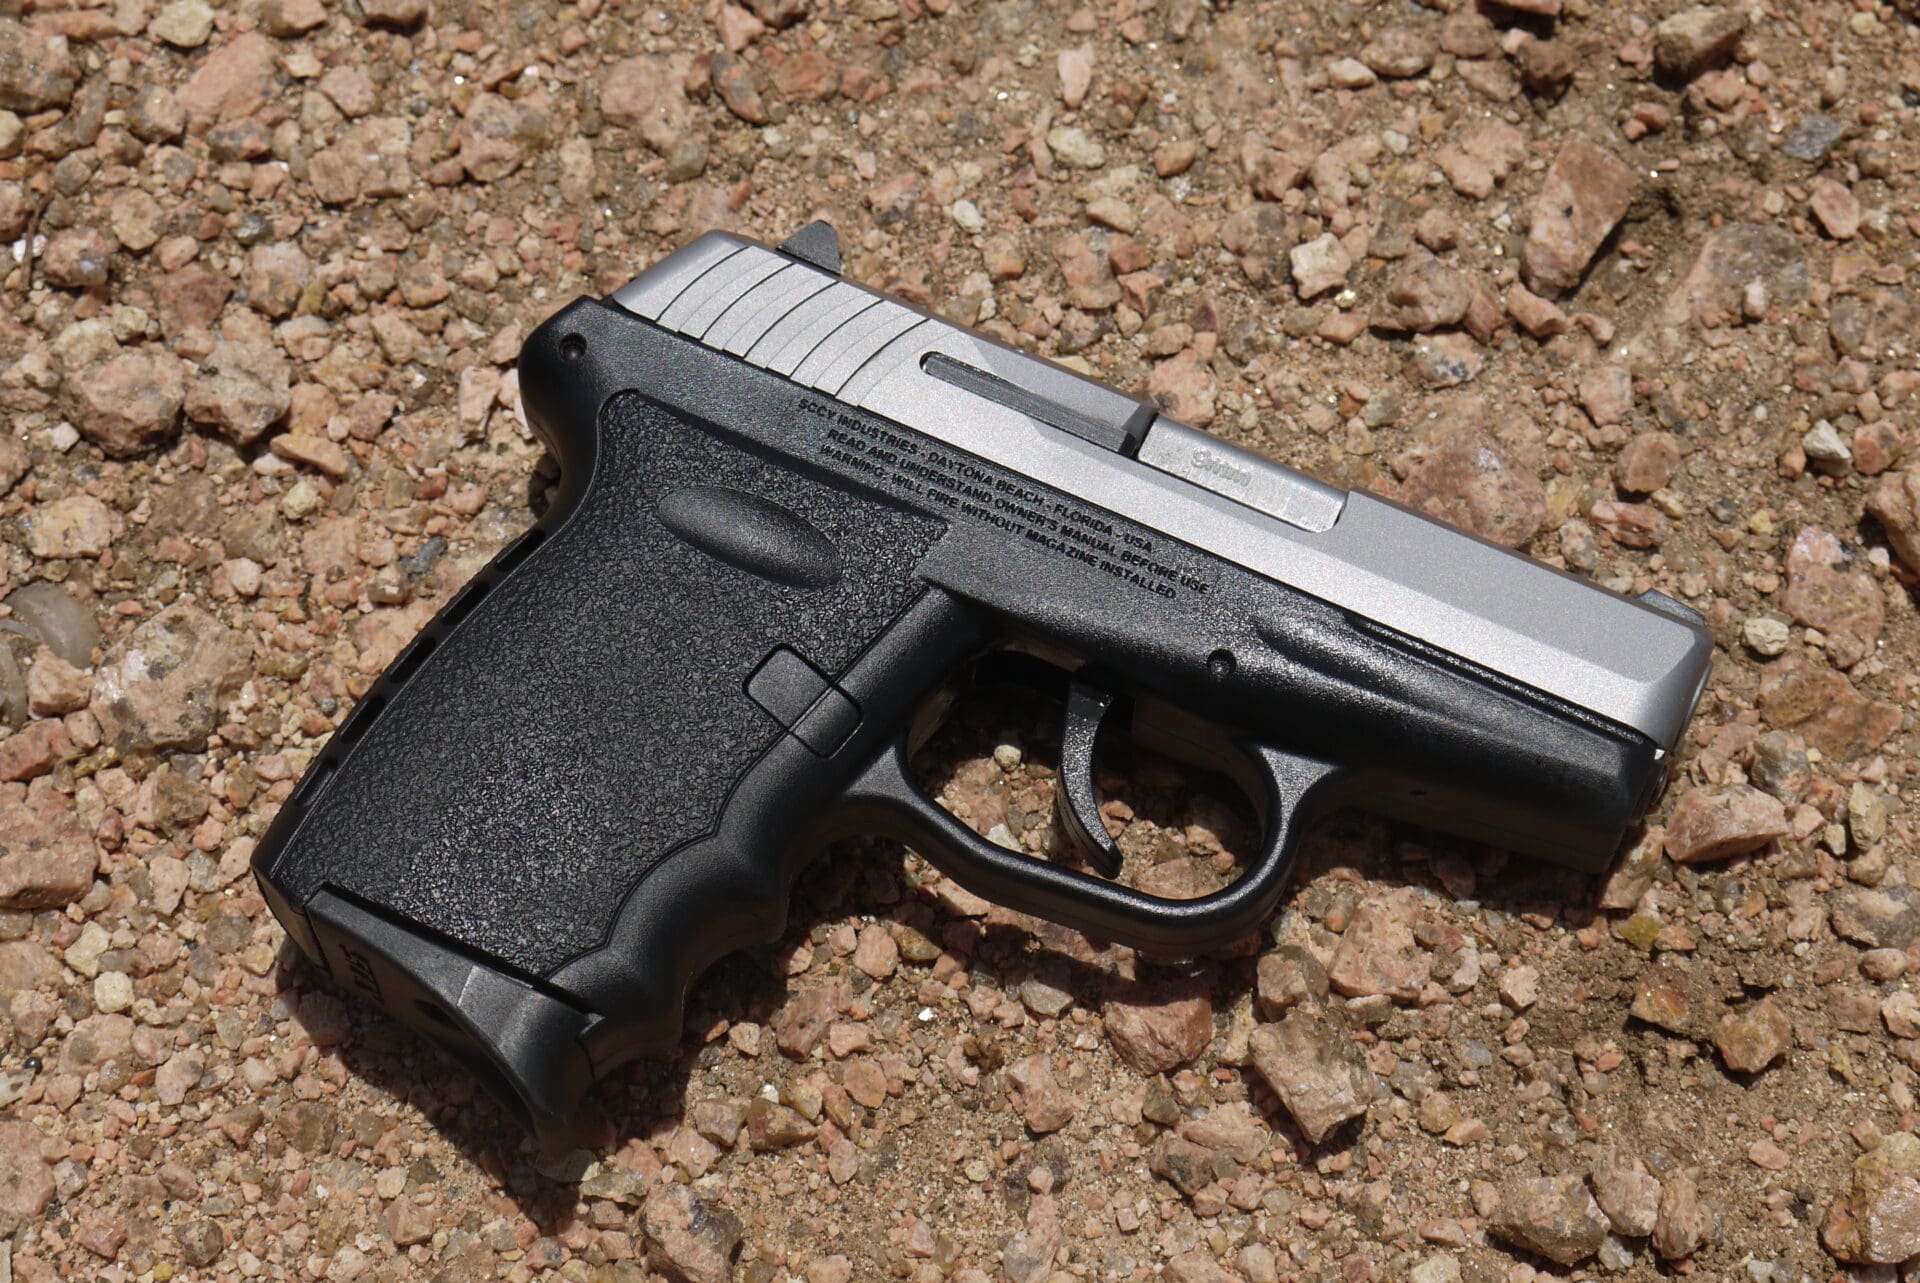 SCCY CPX-2 9mm pistol